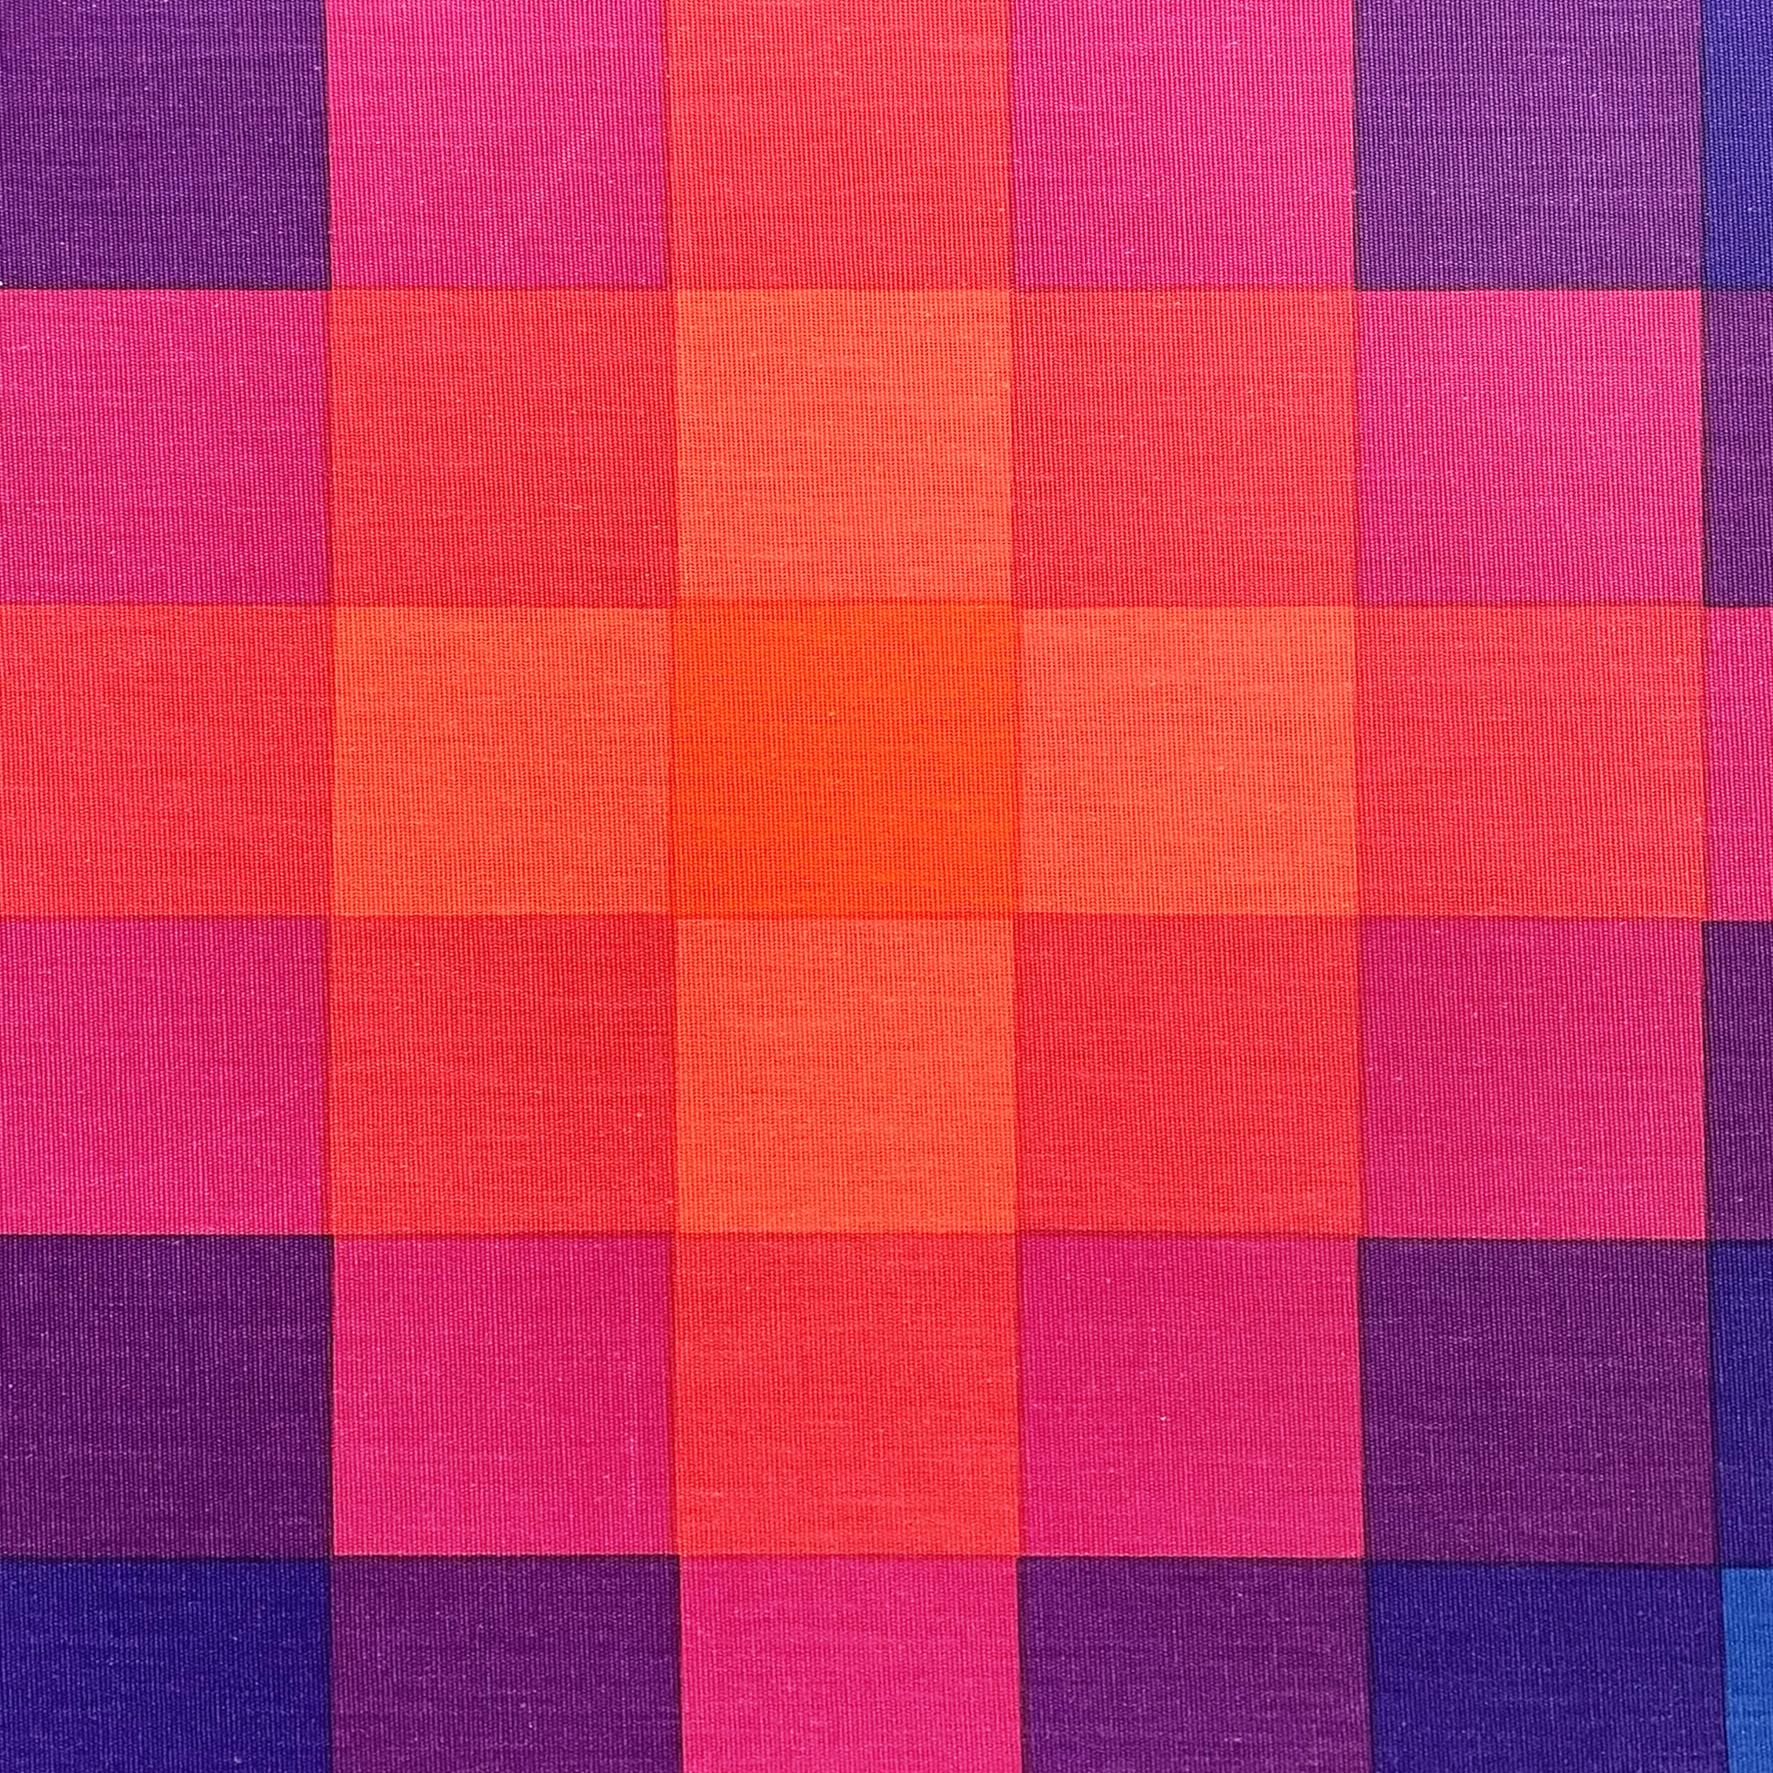 Danish Space Age Geometric square painting by Verner Panton, 1970s
Geometric square painting composed of several squares placed in a concentric way in color: red, pink, blue. blue, green and purple. 
The design is printed on fabric.
Made by Verner